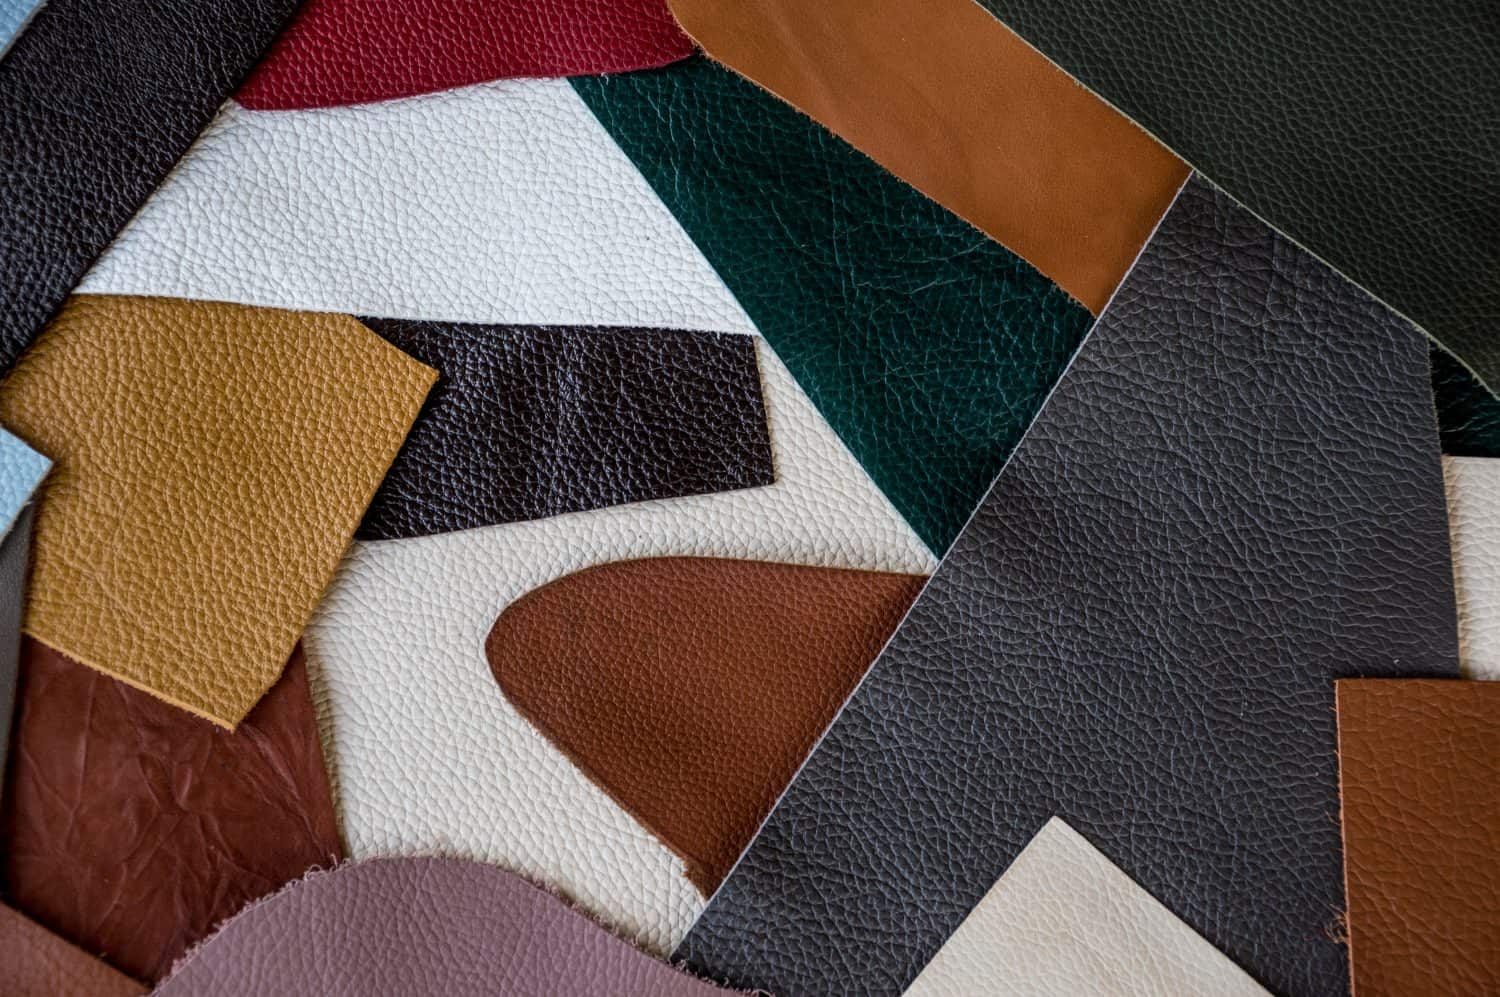 Pieces of multicolored leather for needlework, patchwork.